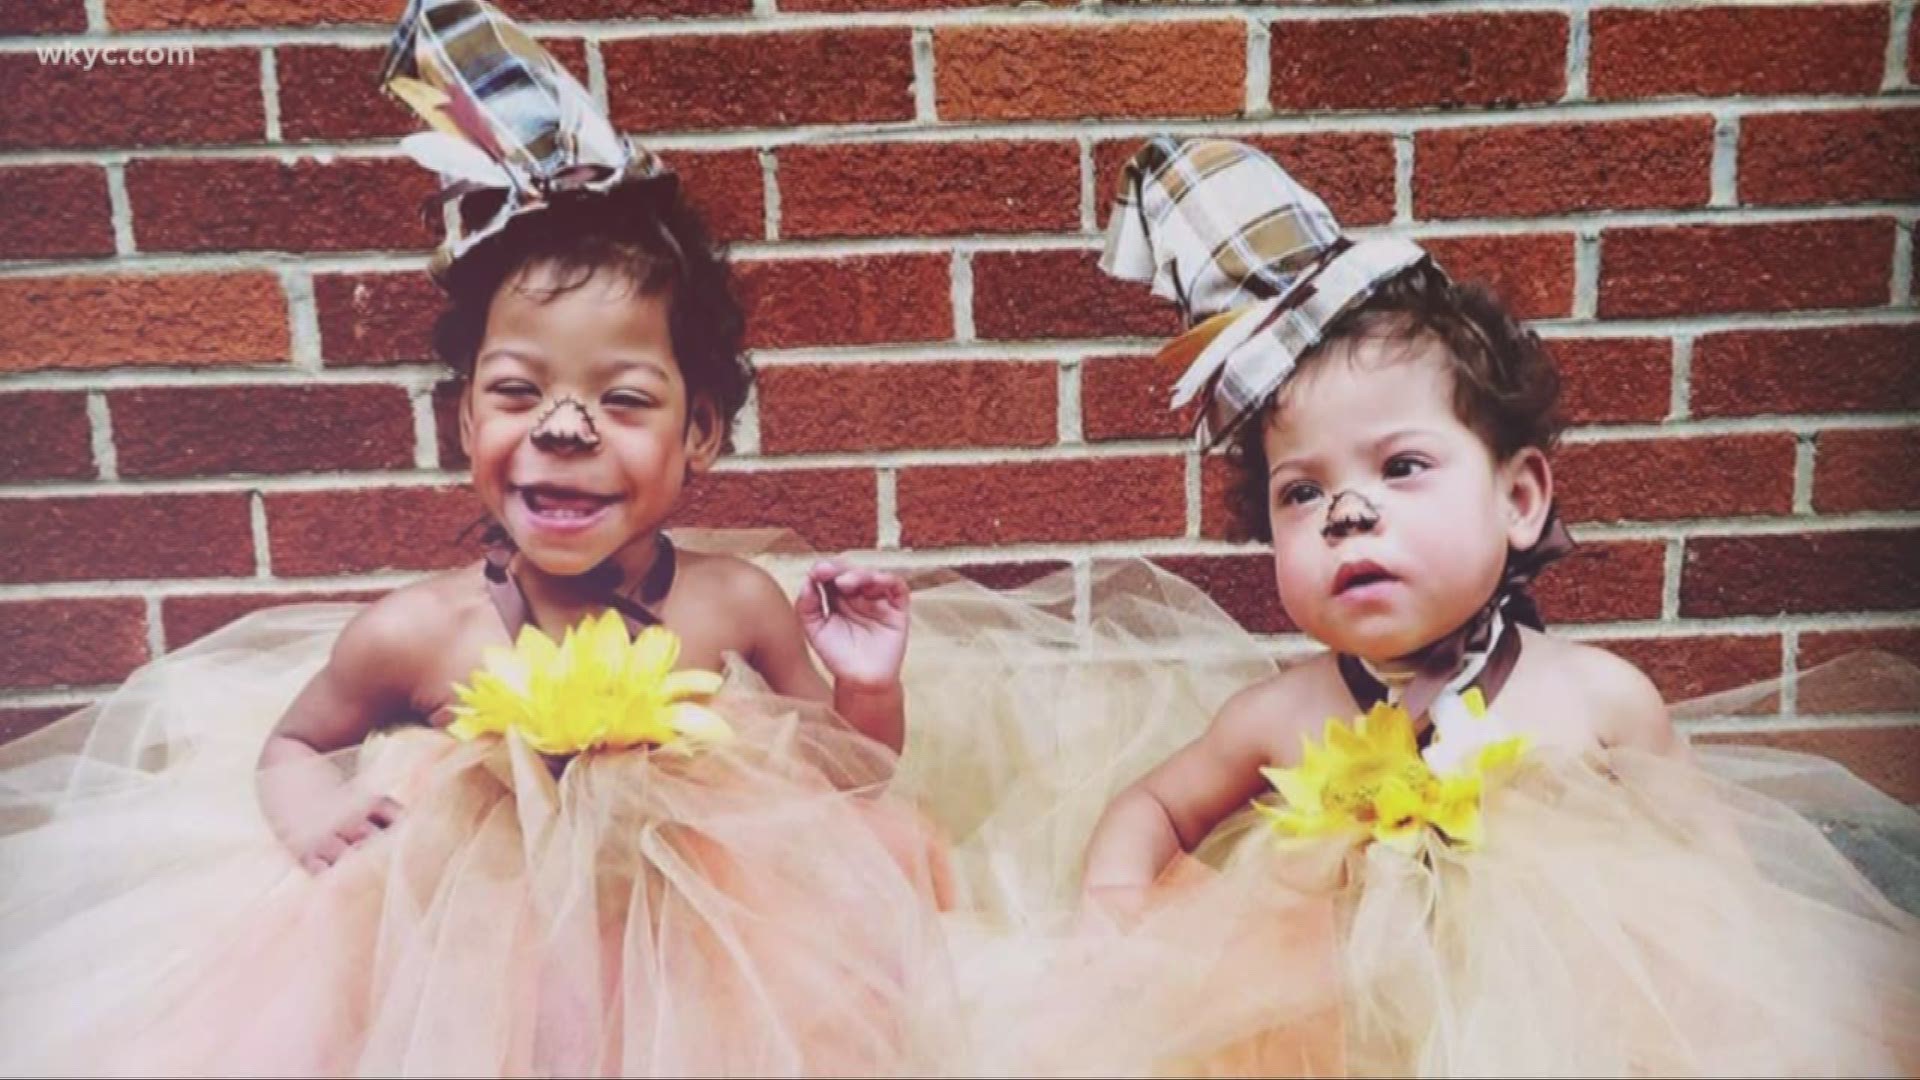 Charlee and Lennix broke every barrier. We think that's worth celebrating.